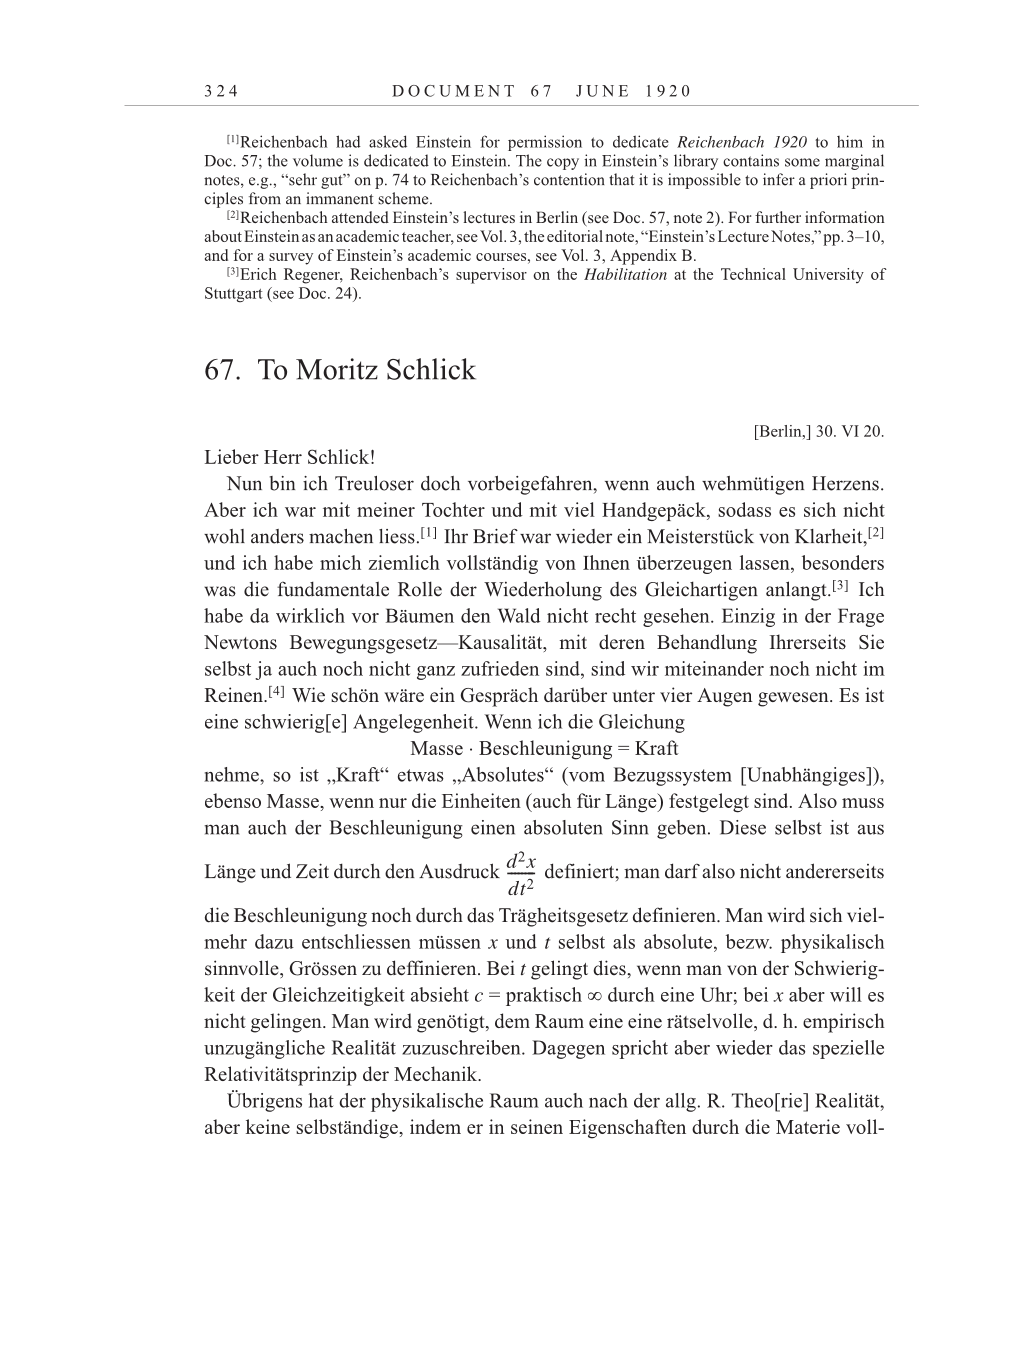 Volume 10: The Berlin Years: Correspondence May-December 1920 / Supplementary Correspondence 1909-1920 page 324